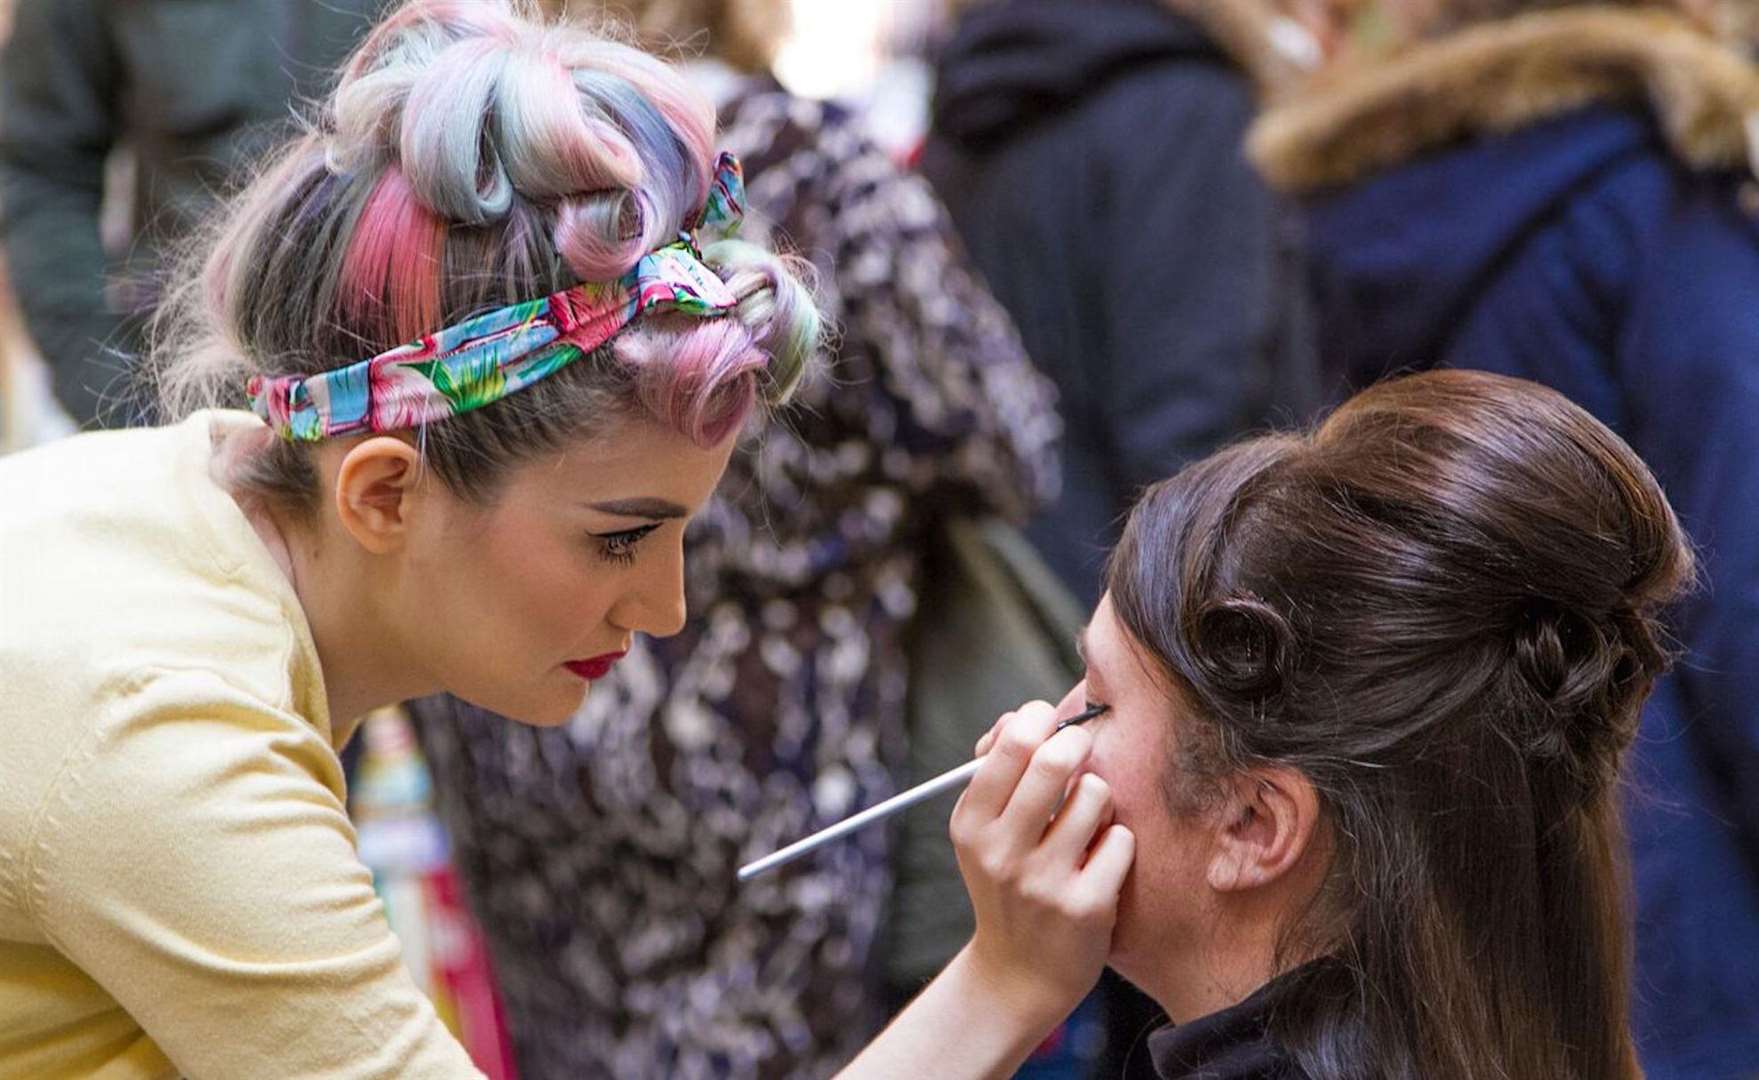 Vintage-inspired makeovers will be available at Lou Lou's Vintage Fair